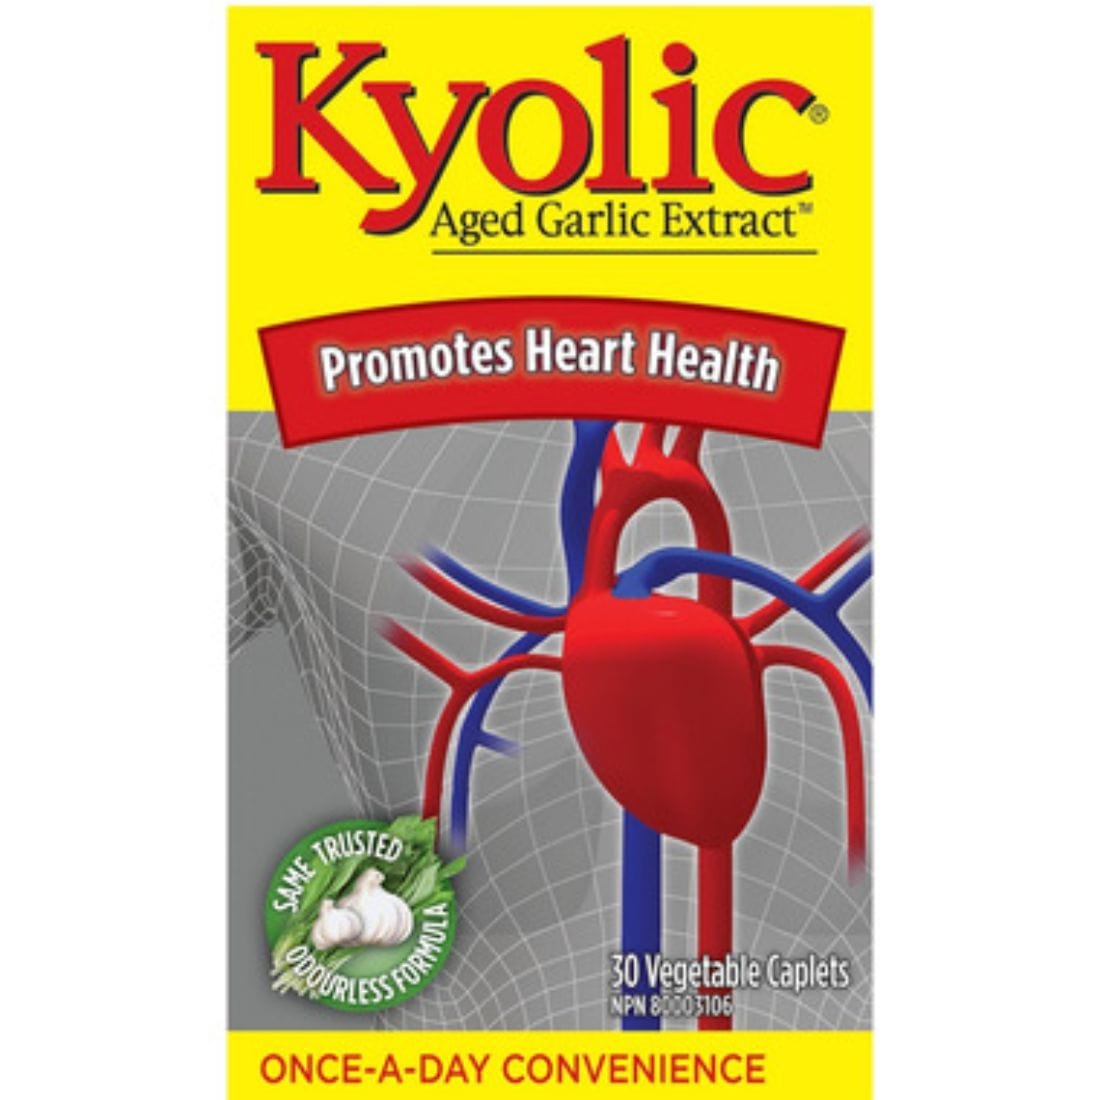 Kyolic Aged Garlic Extract, Once a Day, 30 Vegetable Caplets